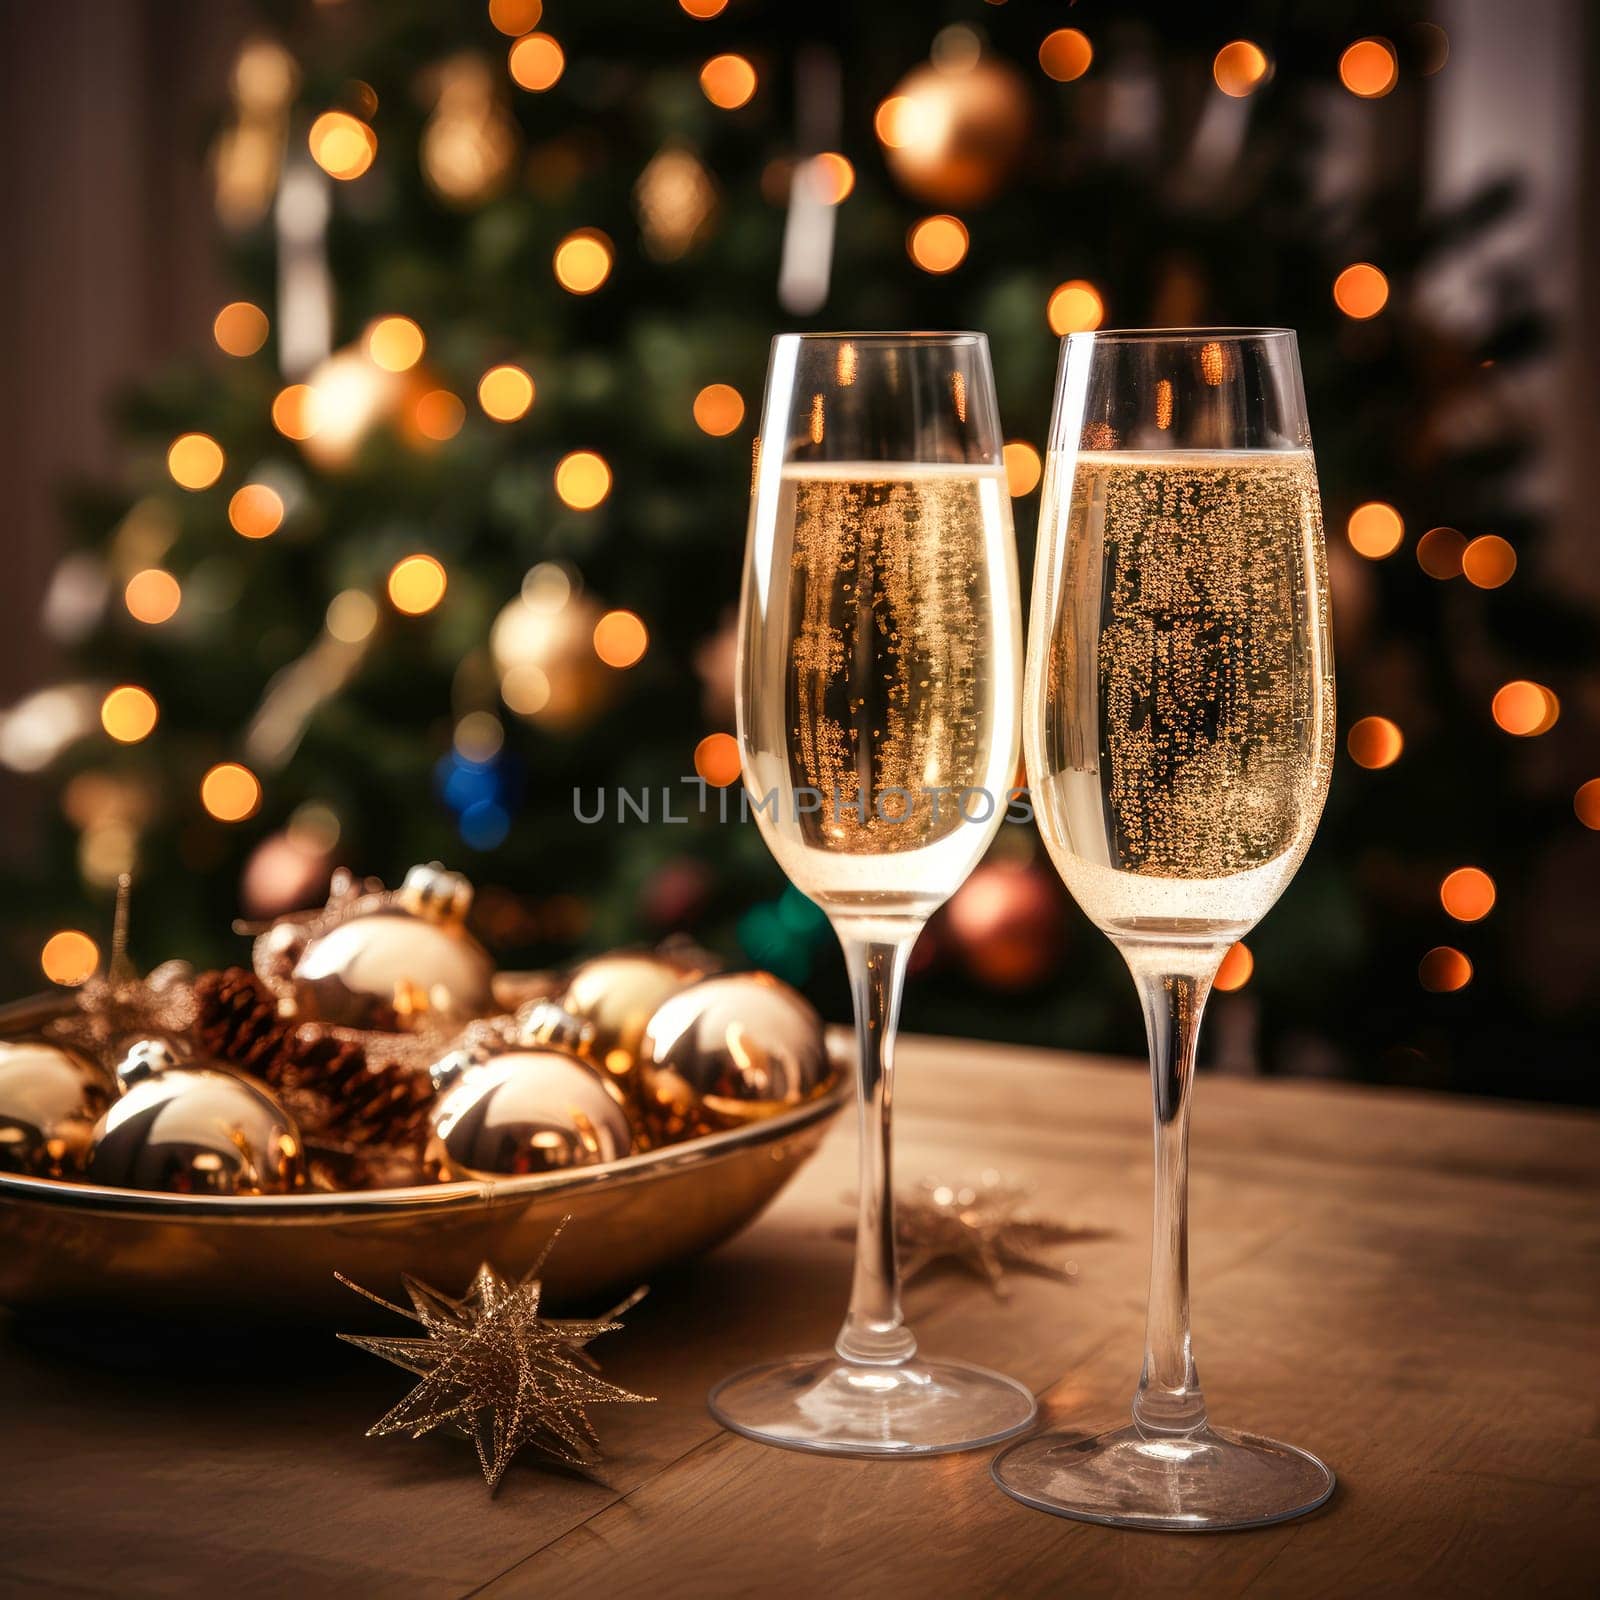 Champagne Toast Celebration - Happy New Year With Golden Glitter On Blue Abstract Background And Defocused Bokeh Lights by Ramanouskaya